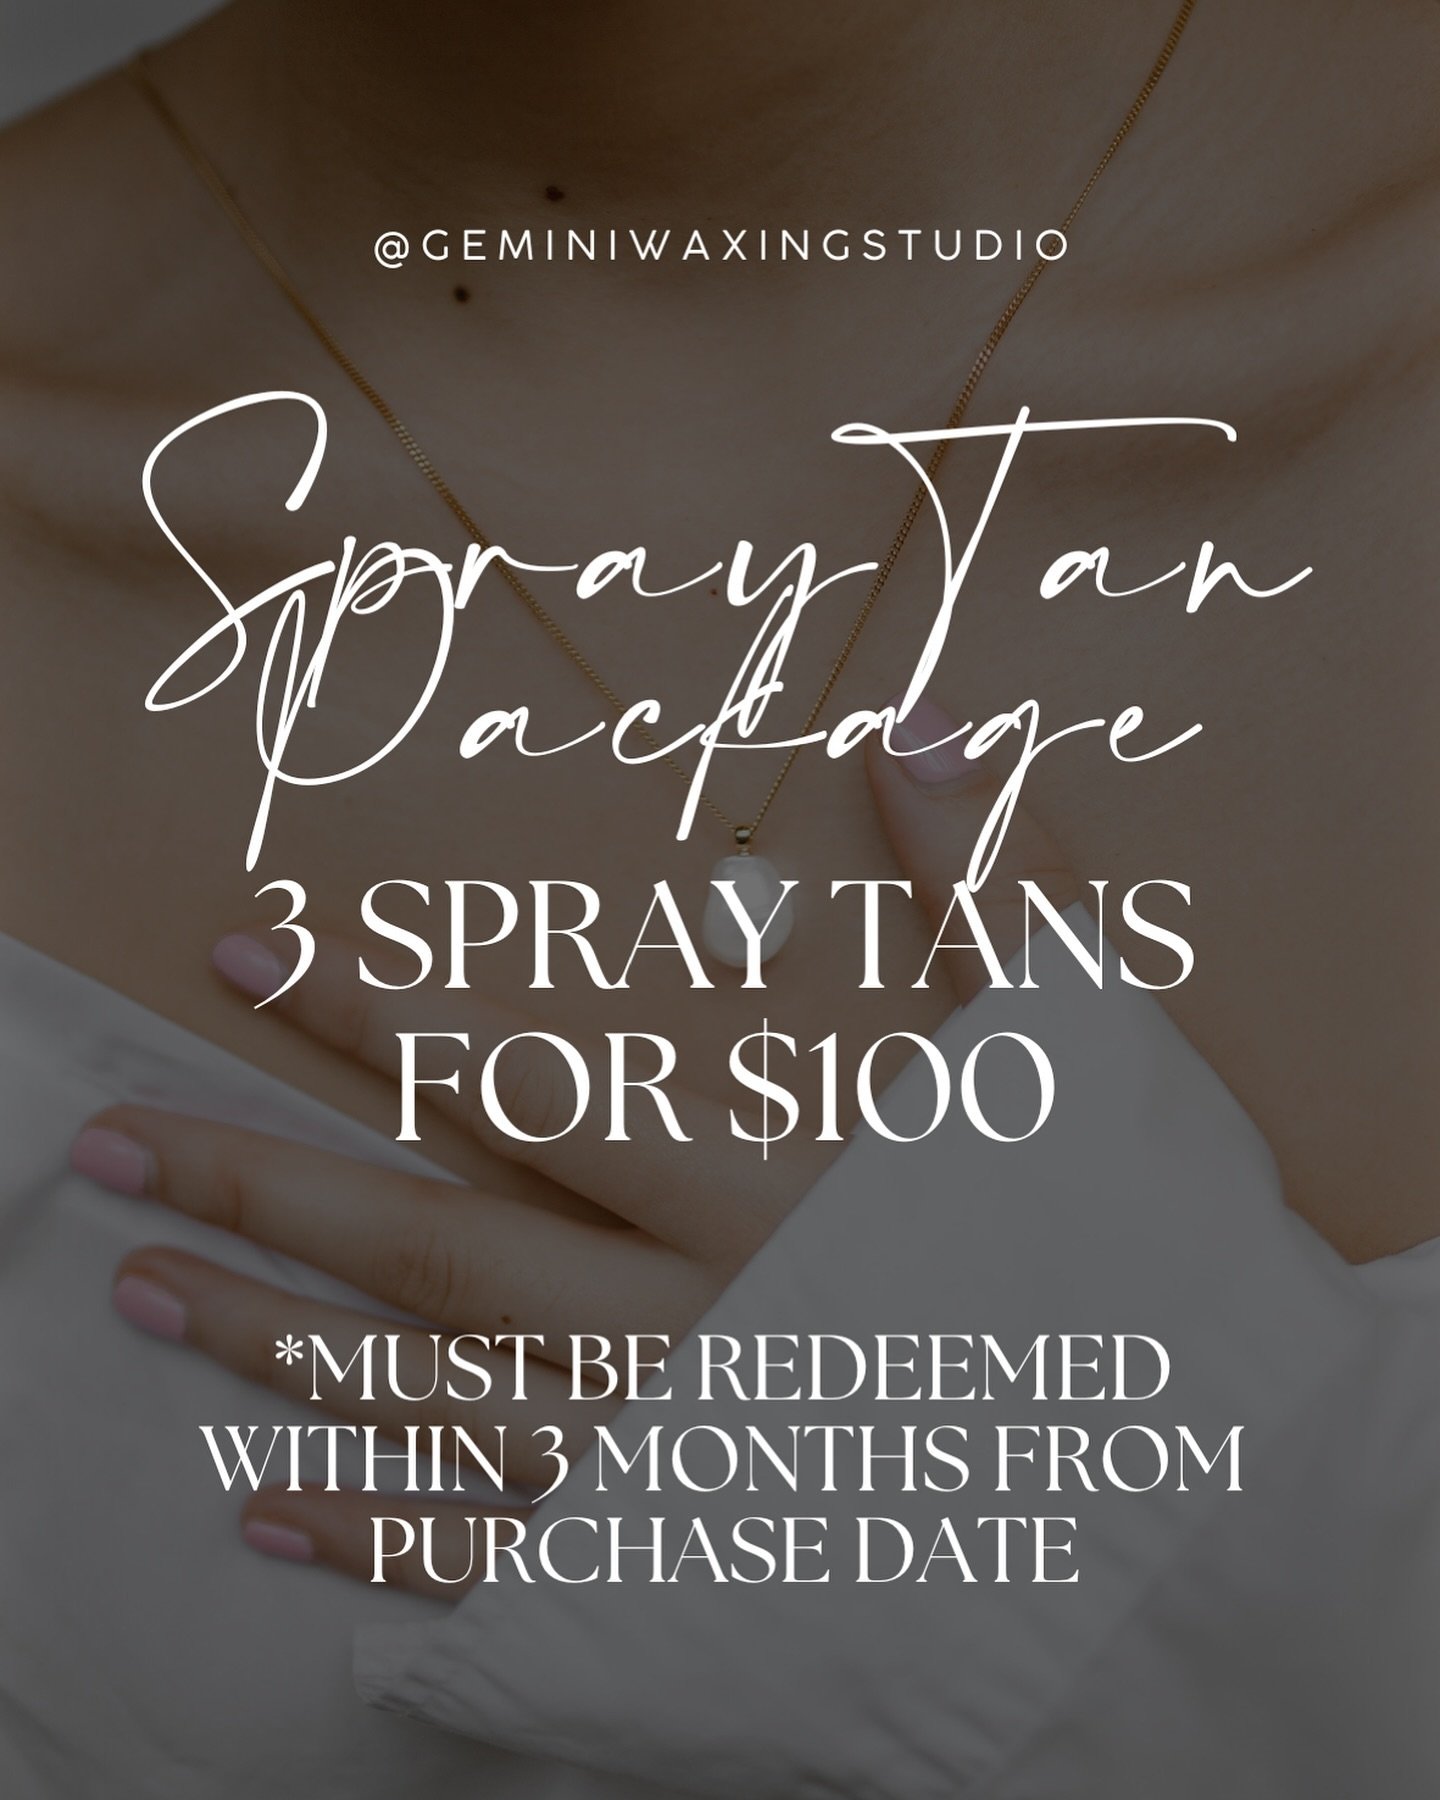 You guys asked for it!! Spray tan packages are available for purchase through the booking link in bio!